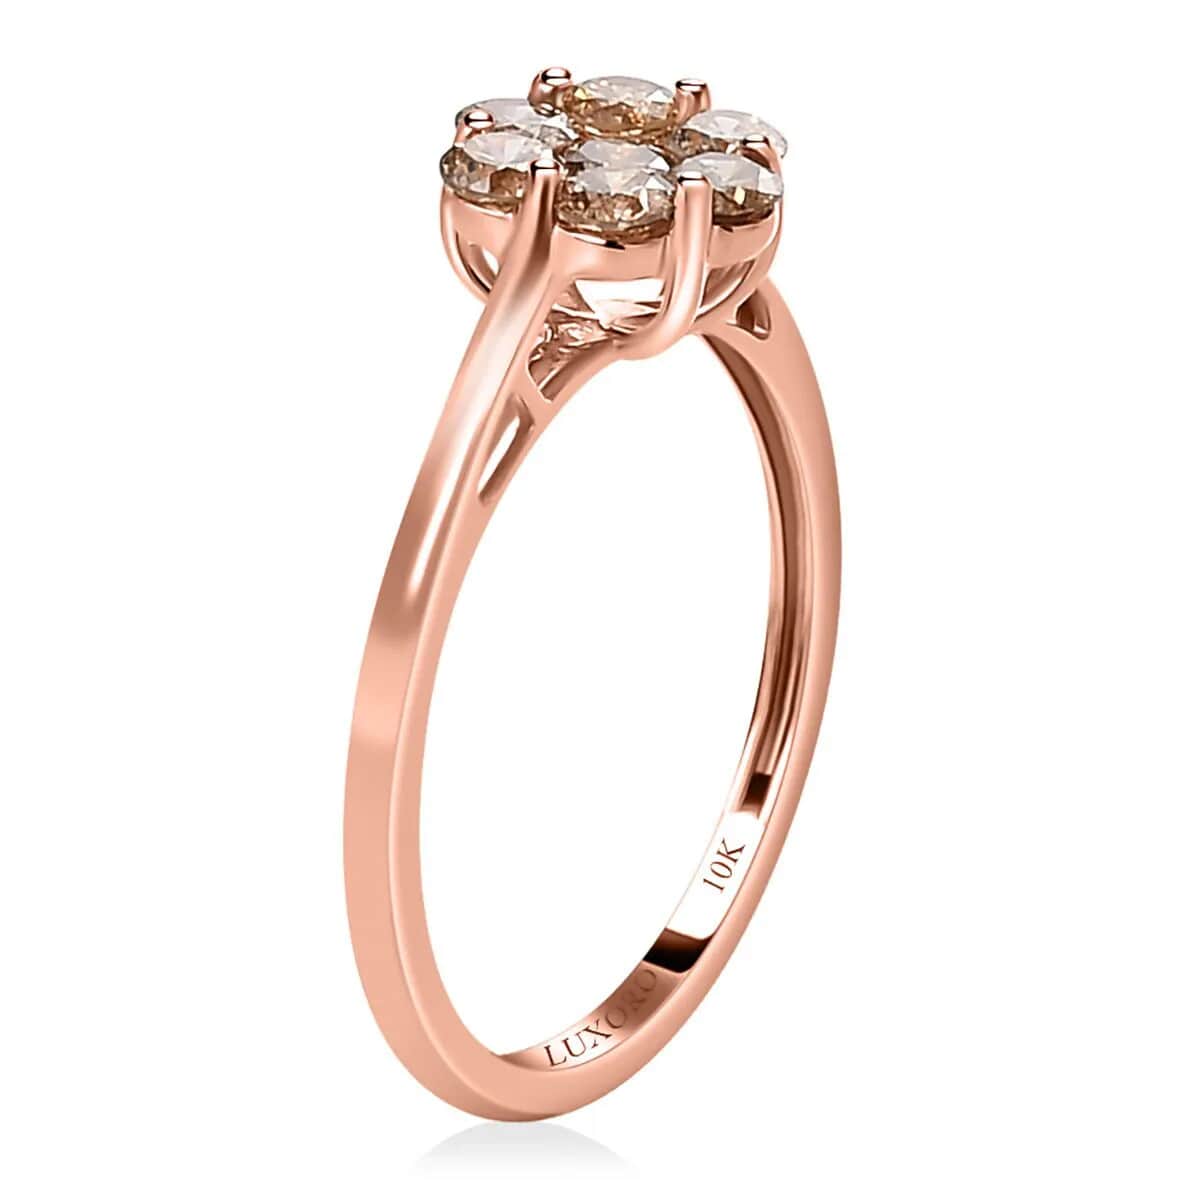 Luxoro 10K Rose Gold Natural Champagne Diamond Floral Ring ,Diamond Floral Ring, Engagement Rings, Seven Stone Ring For Women, Promise Rings 0.50 ctw image number 3